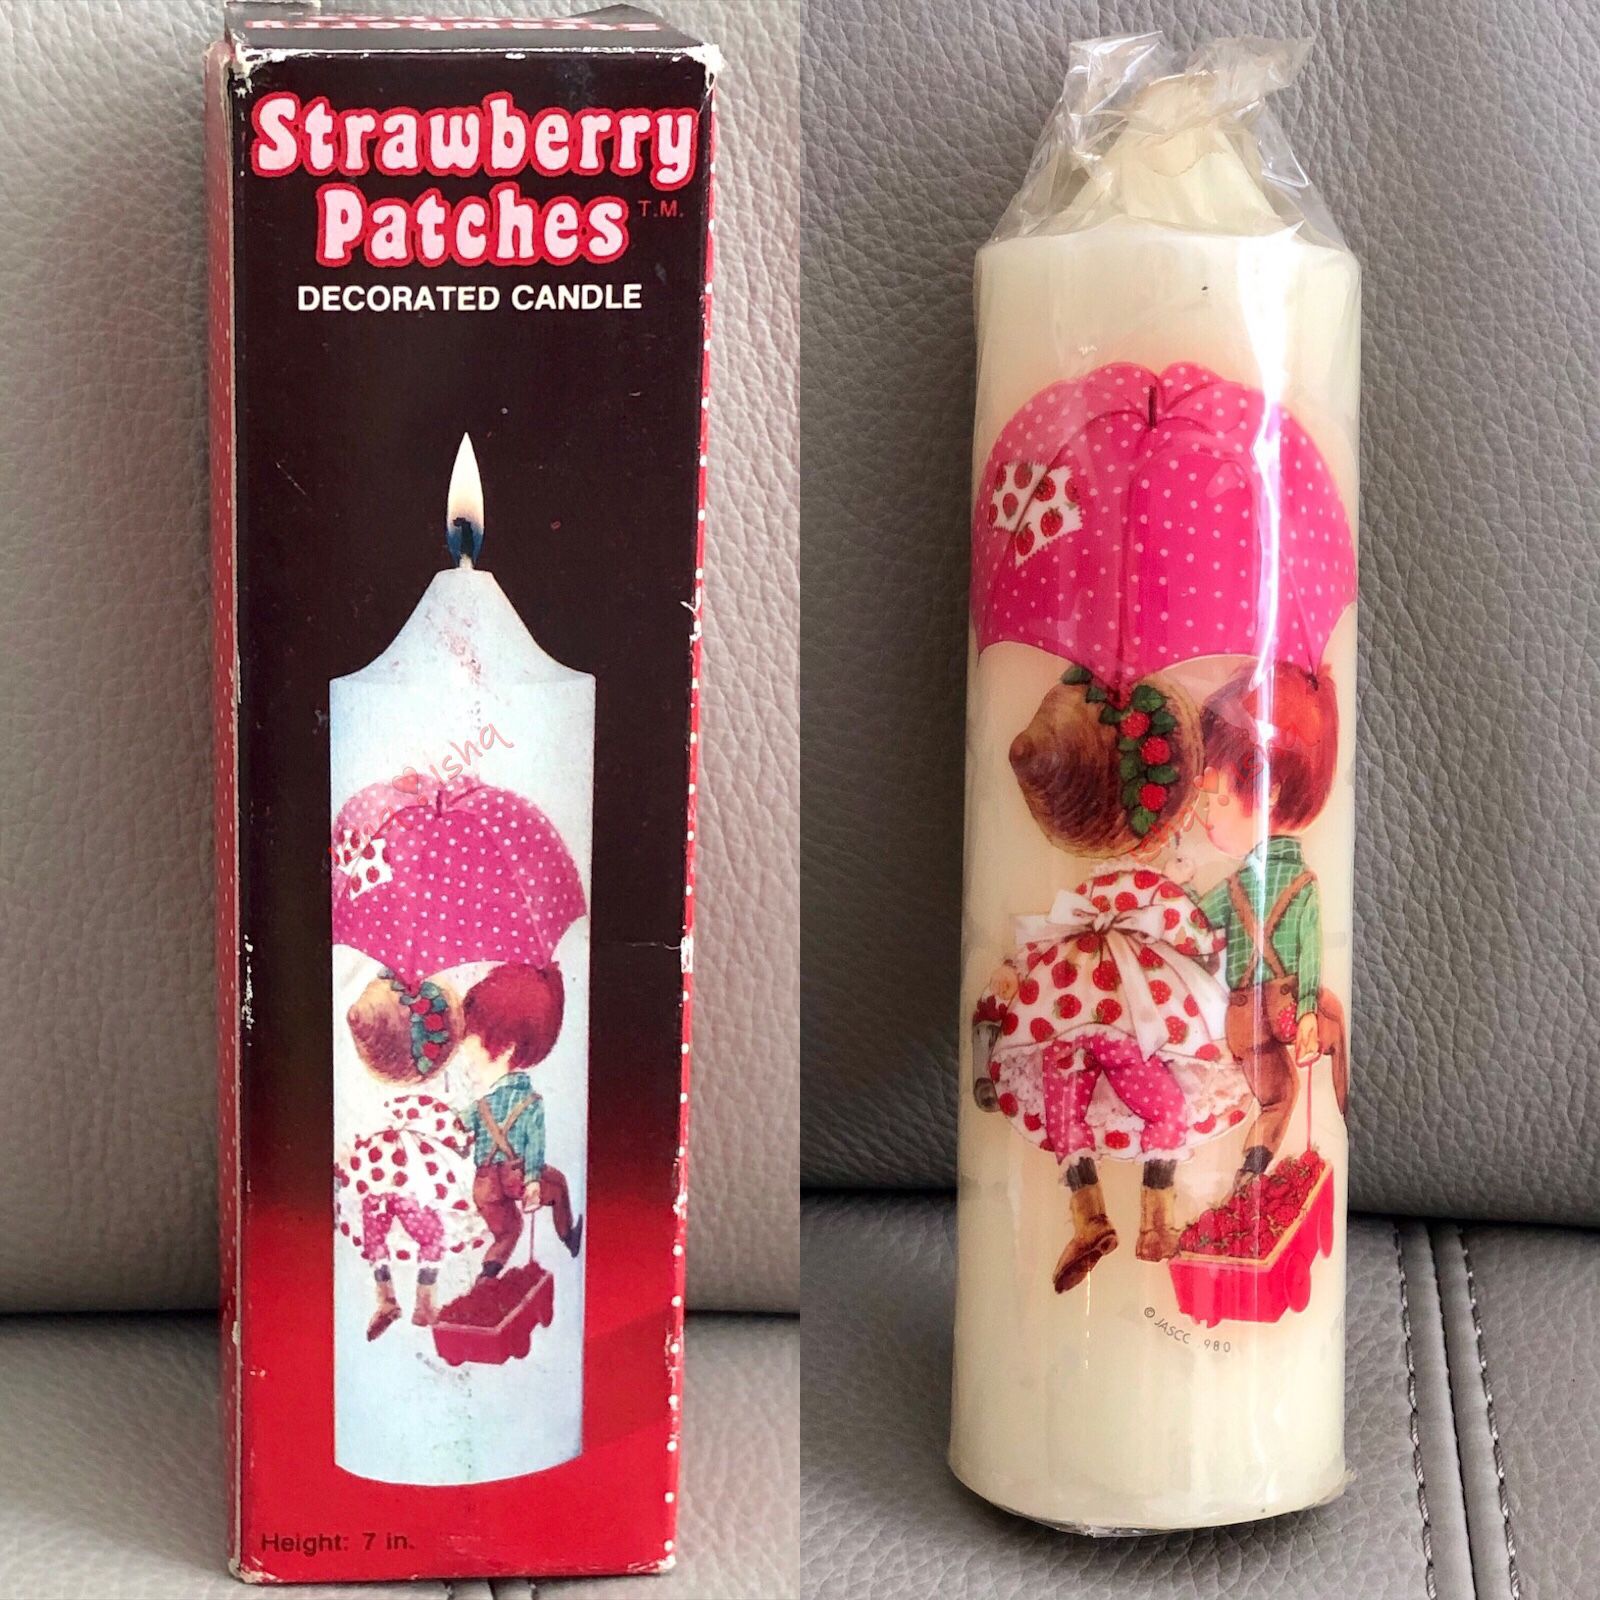 Vintage 1980-81 Jasco Strawberry Patches Decorative Candle 7" New in Package